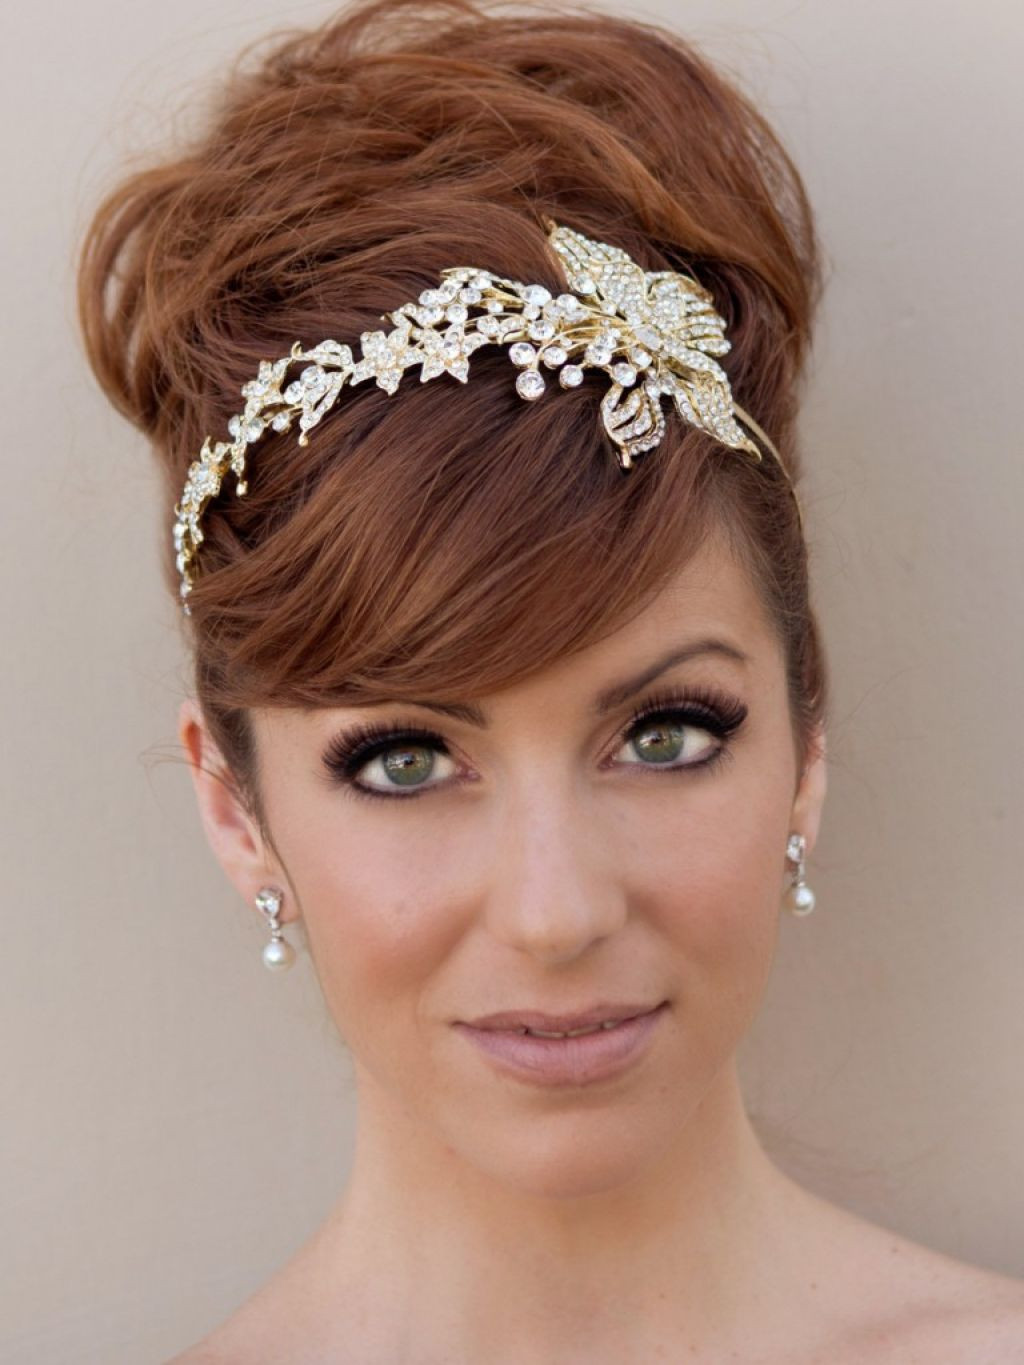 Wedding Hairstyles With Headband
 60 Wedding & Bridal Hairstyle Ideas Trends & Inspiration